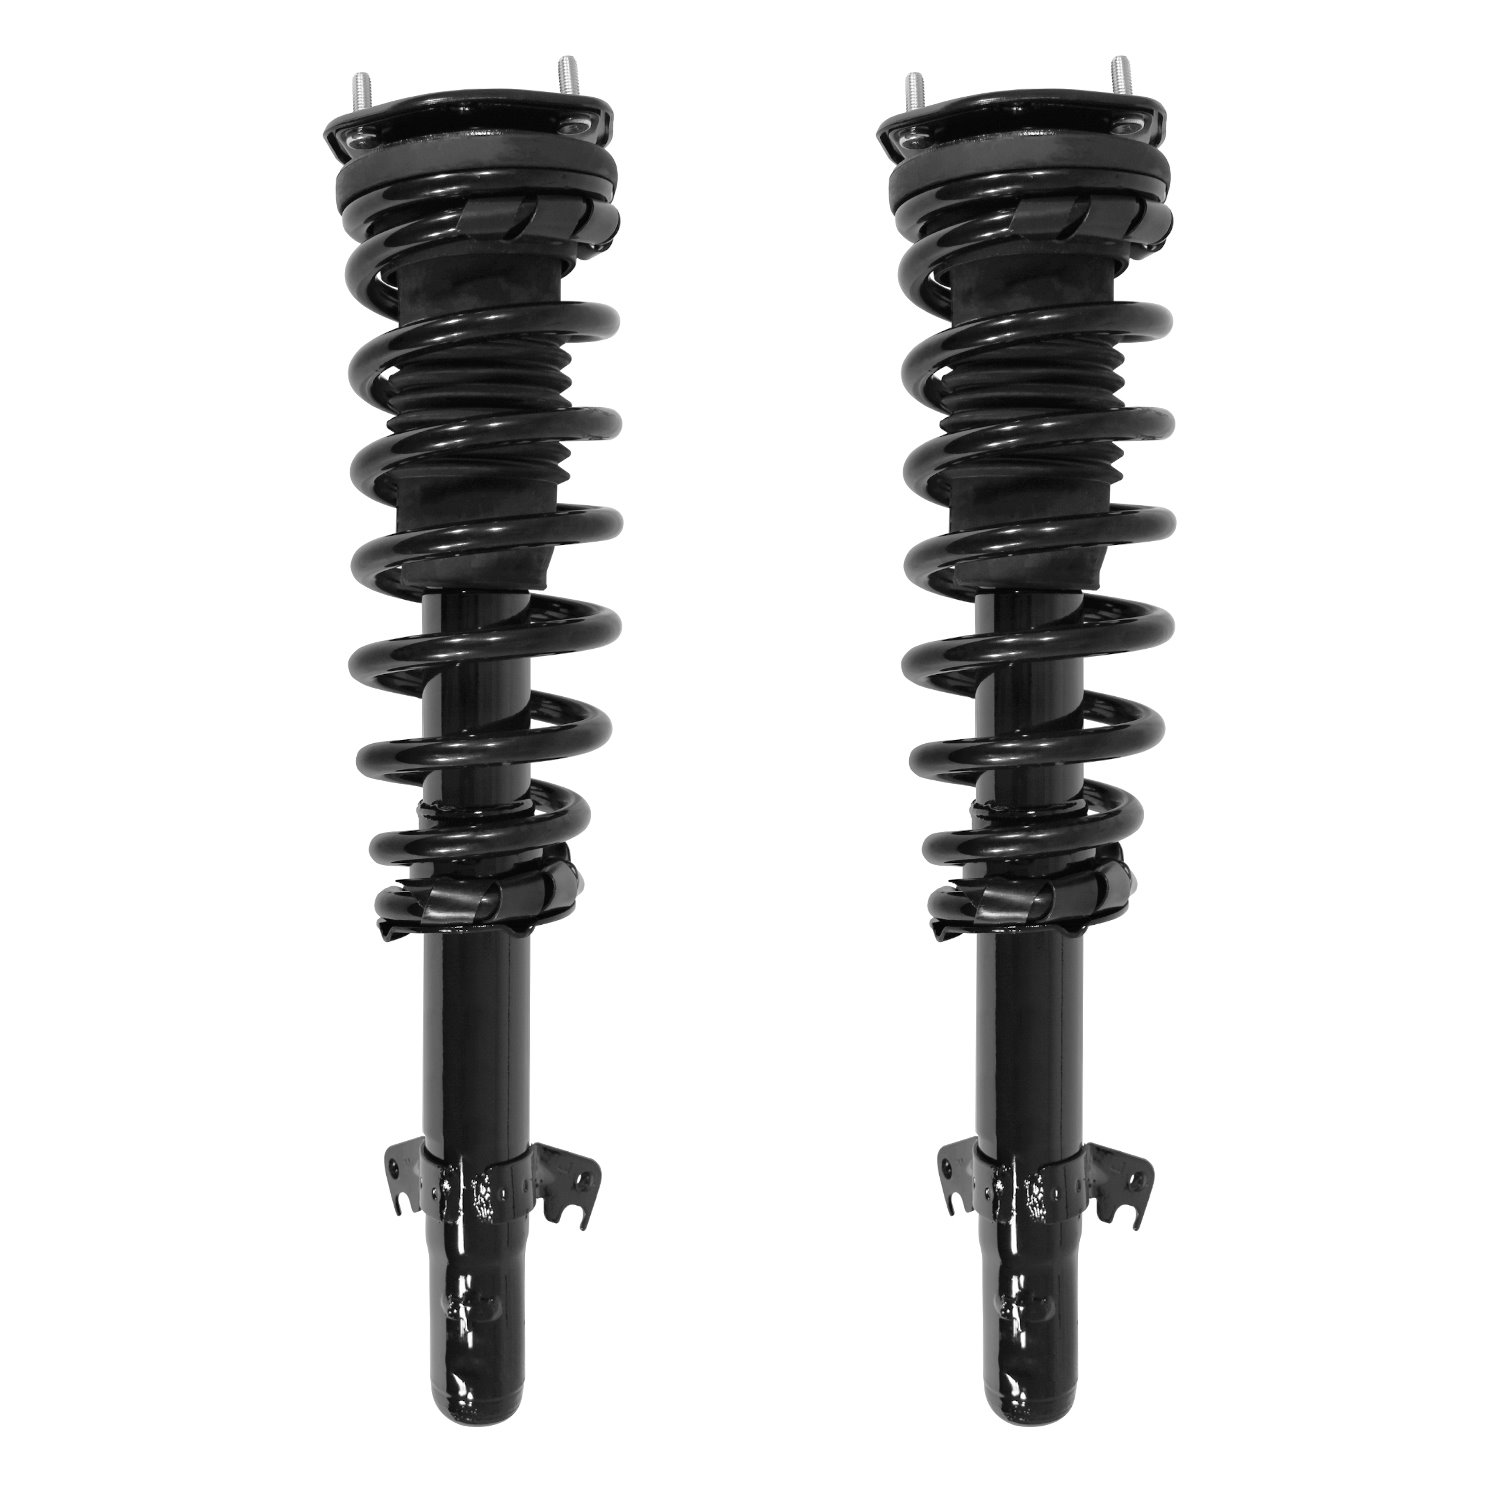 2-11980-001 Suspension Strut & Coil Spring Assembly Set Fits Select Ford Fusion, Mercury Milan